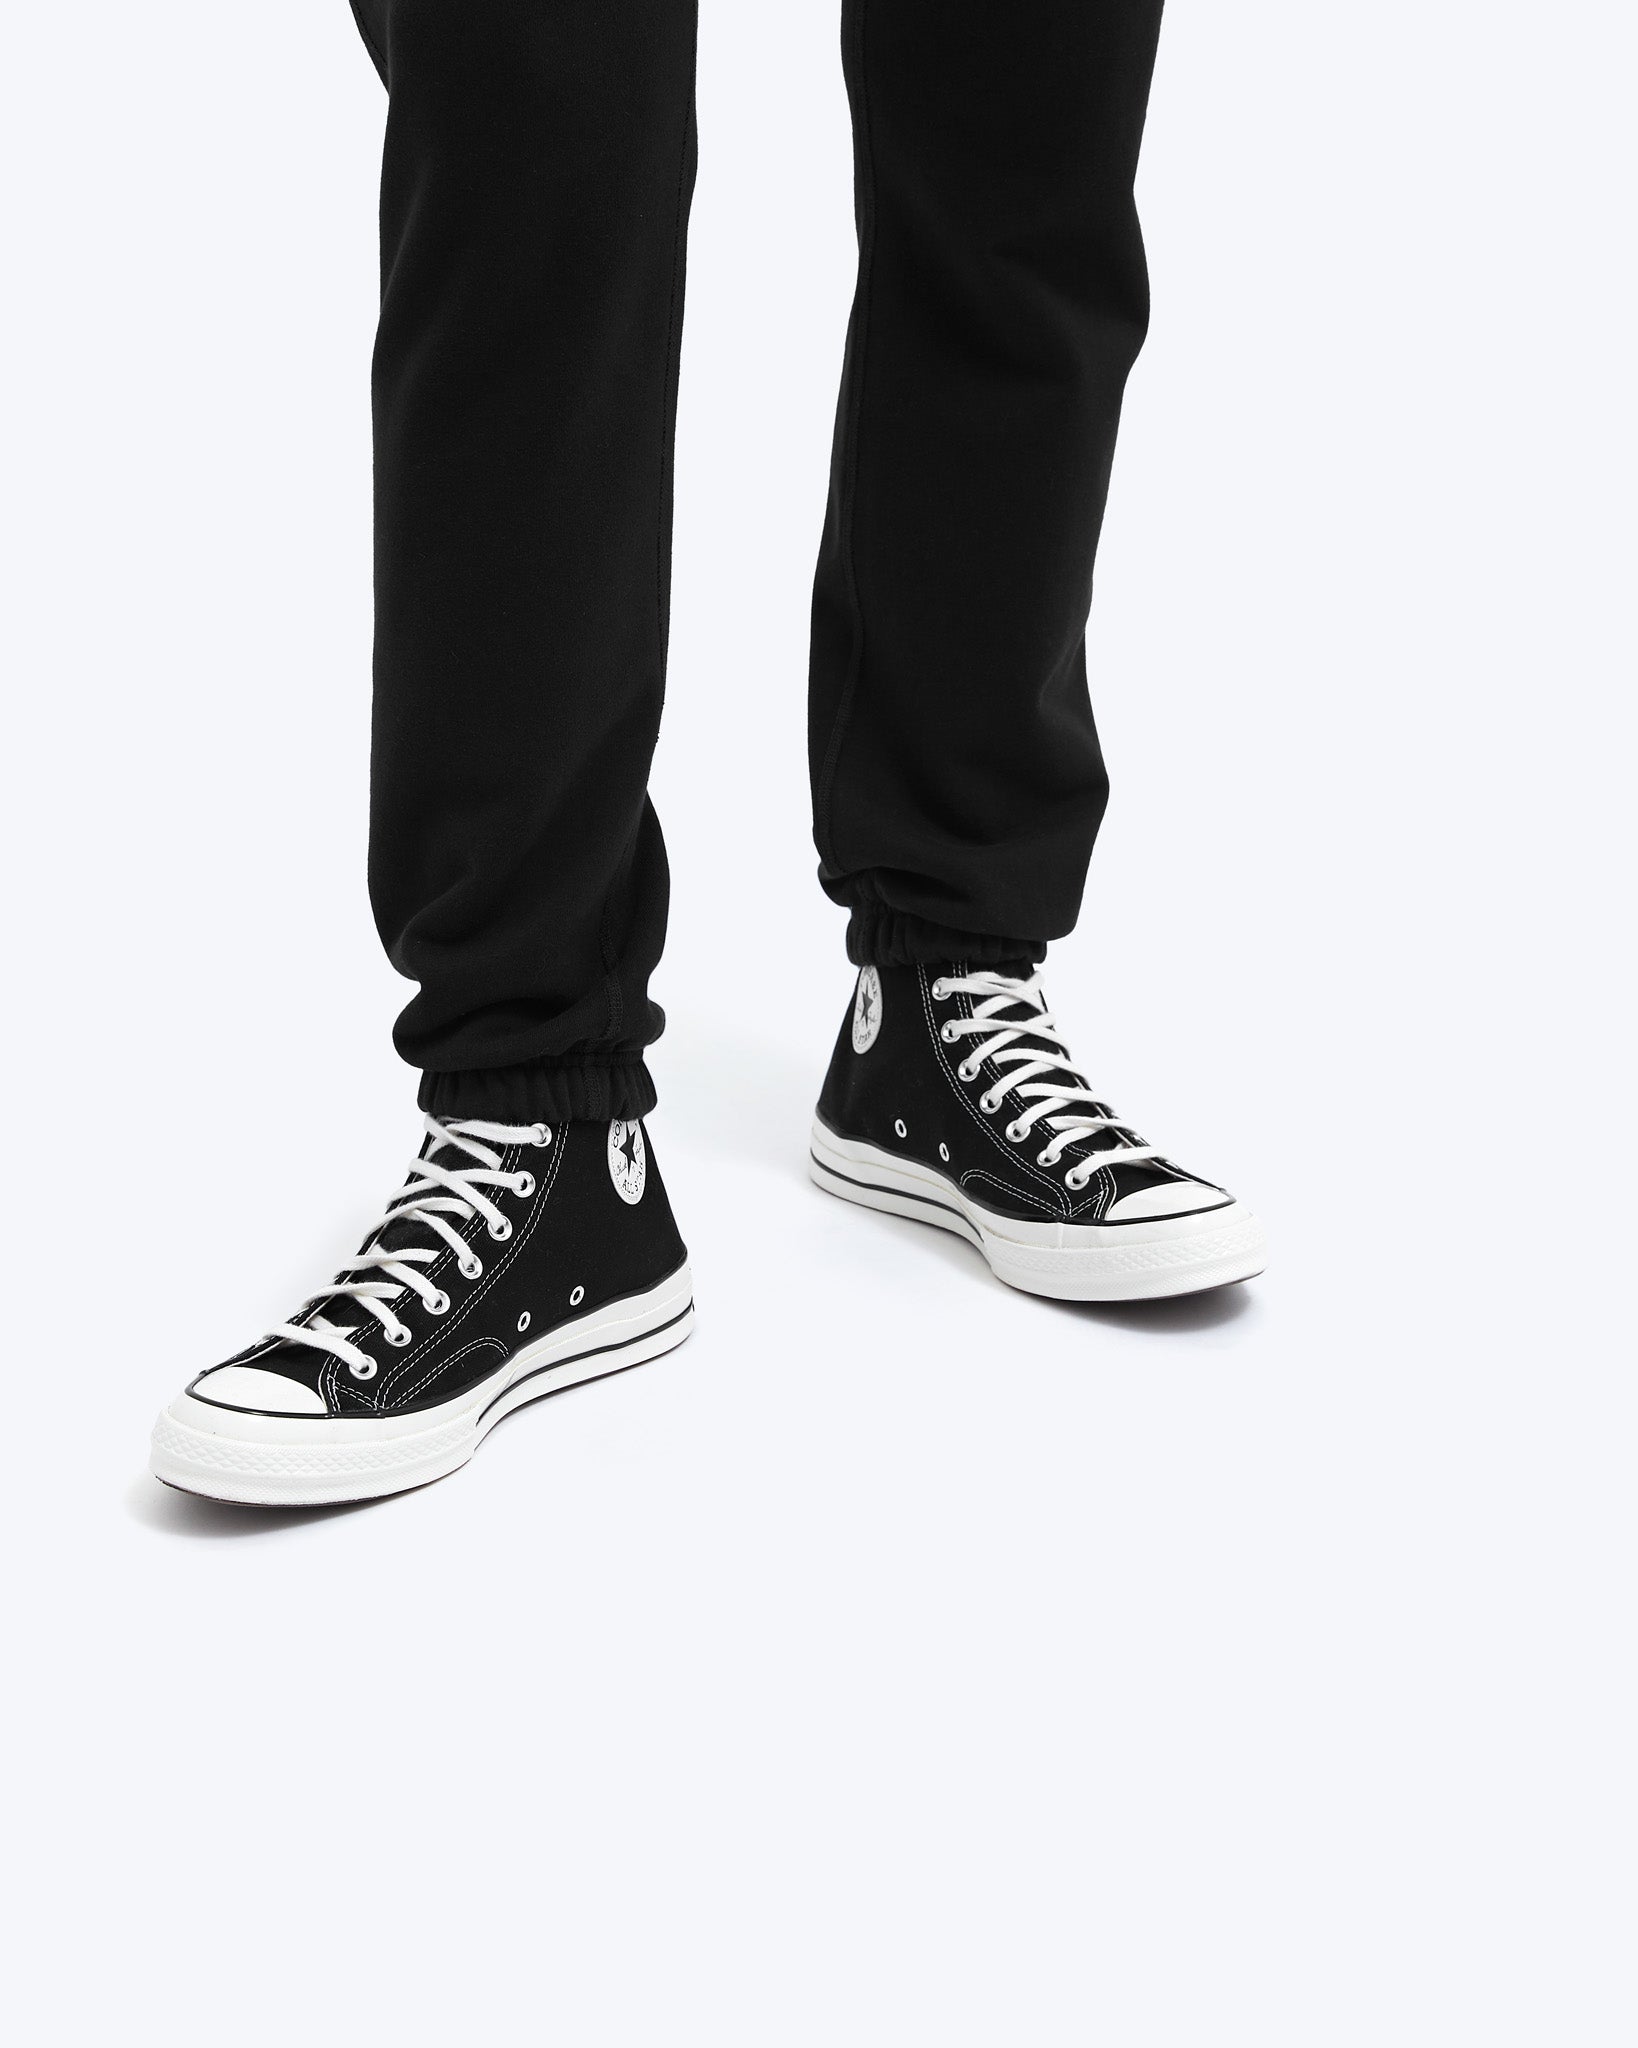 Midweight Terry Cuffed Sweatpant Black